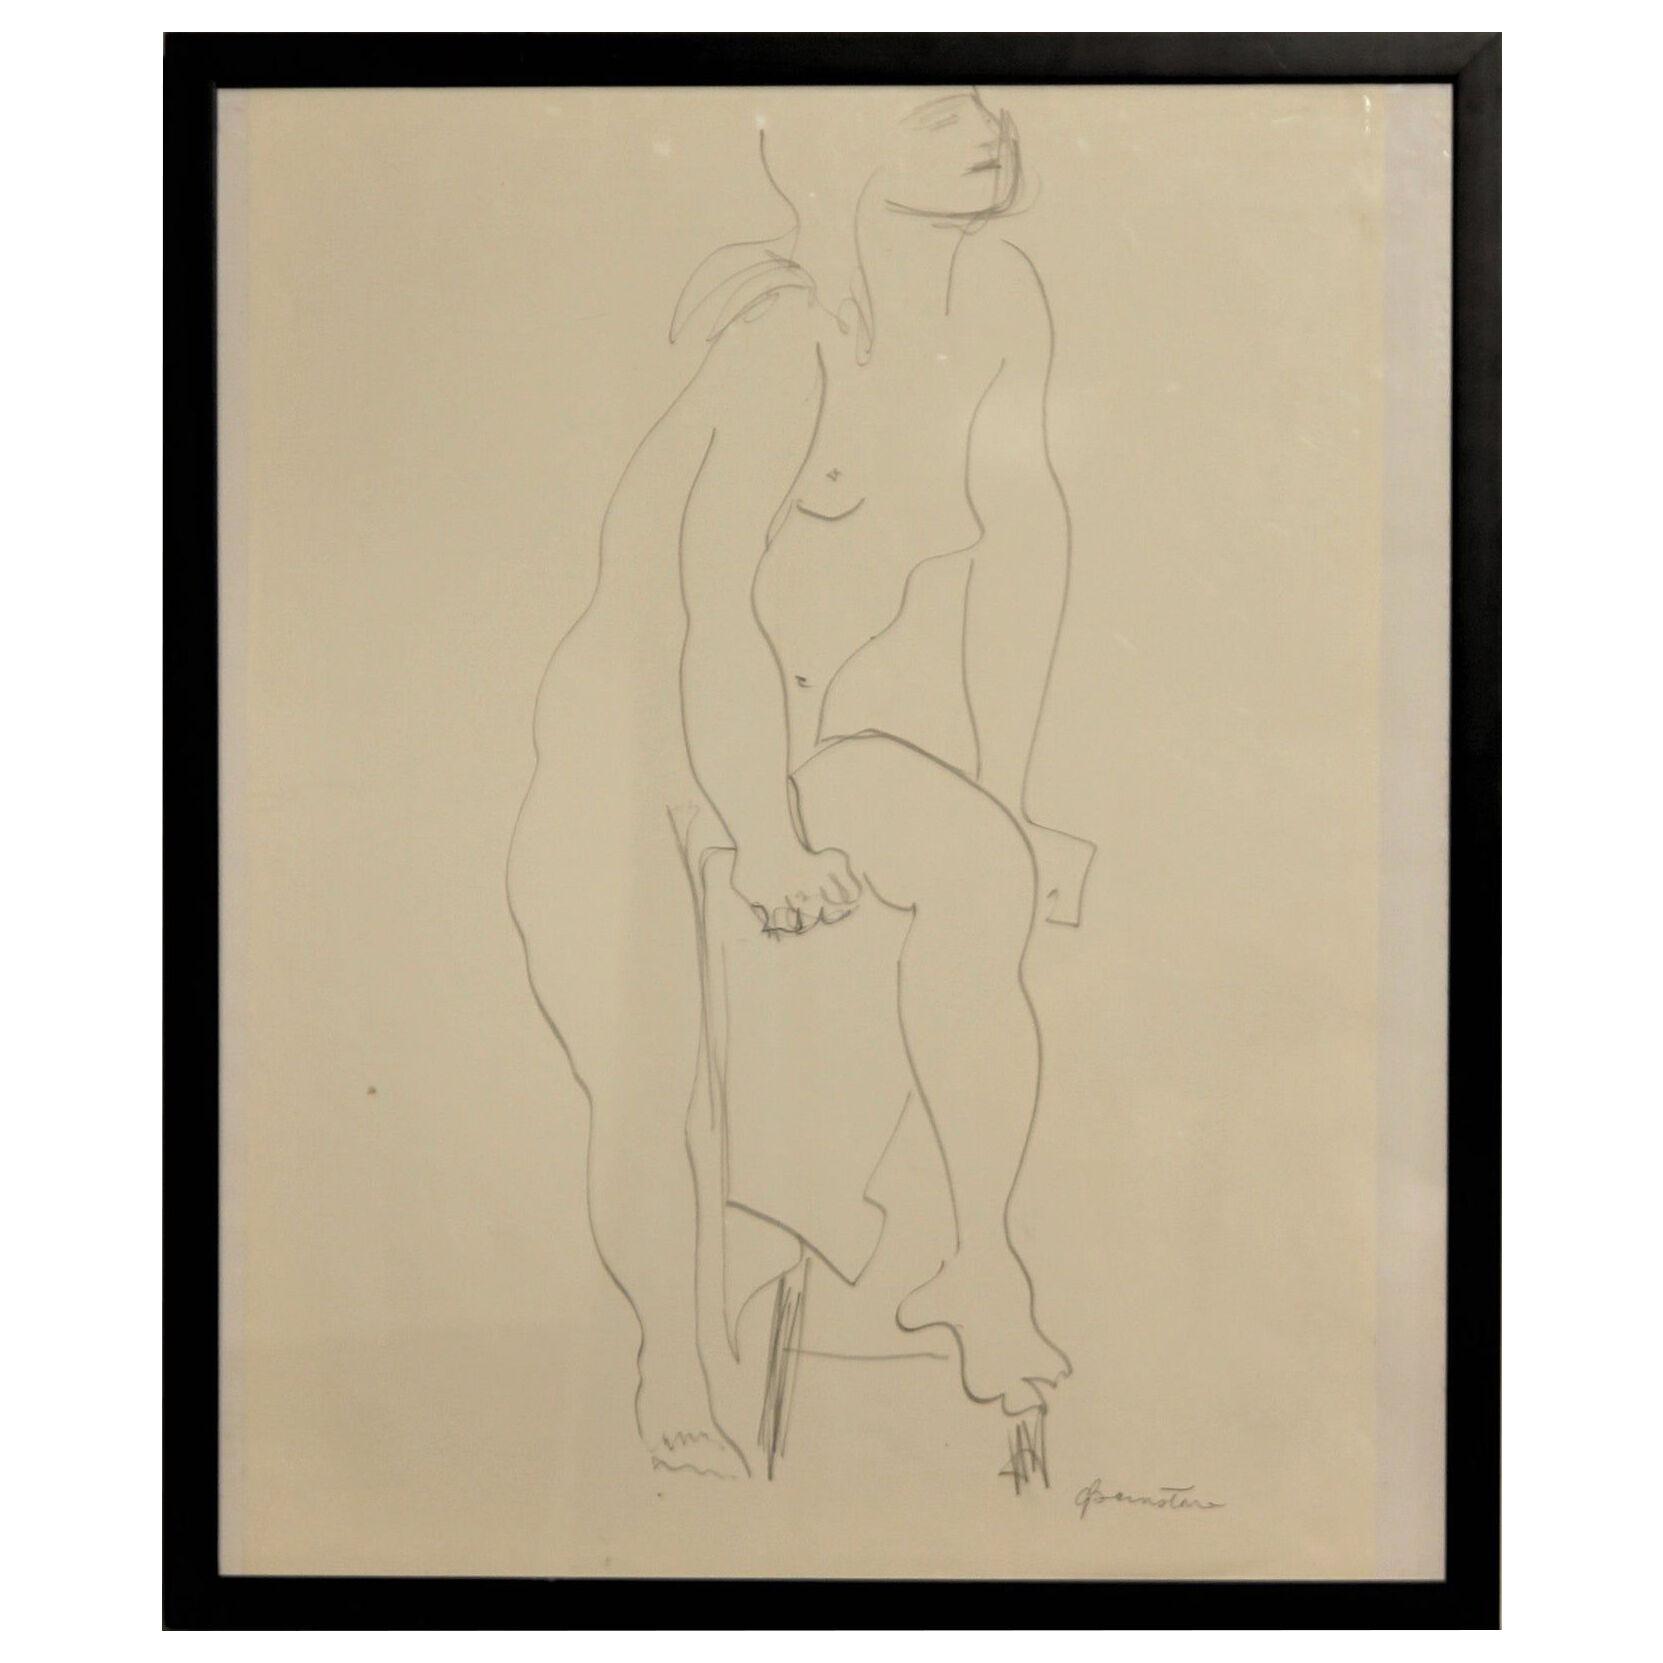 Abstract Pencil Contour Line Drawing of Female Nude with Raised Leg 